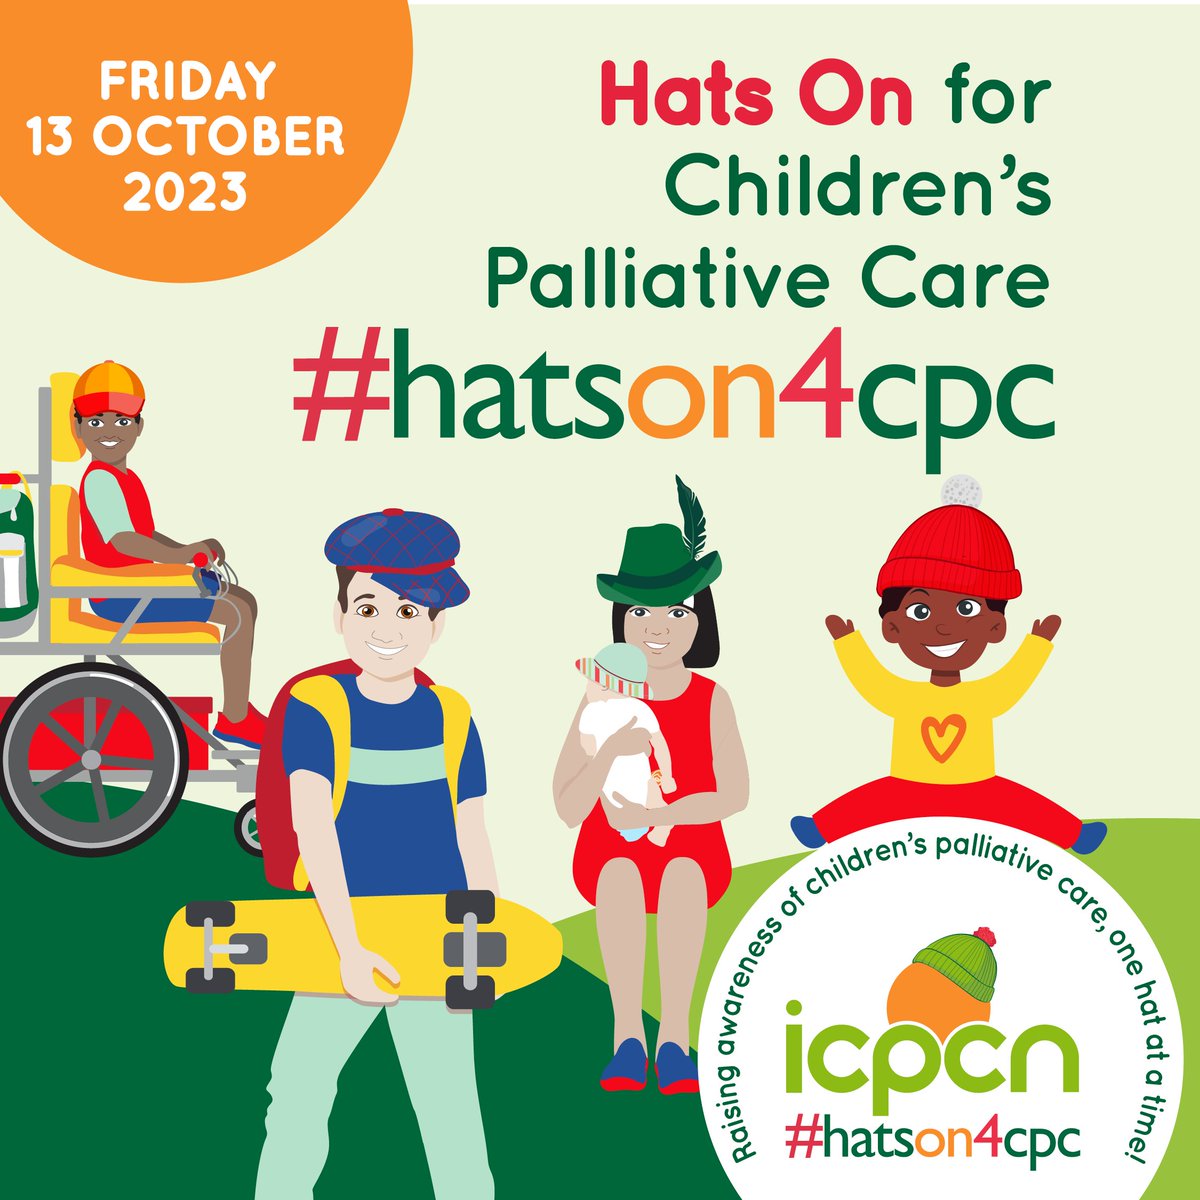 Today is the 10th anniversary of the #HatsOn4CPC campaign. We remember all children in the world living with a life-threatening illness! We advocate for their right to the highest quality of life, access to #UHC access to #PalliativeCare @ICPCN @APCAssociation @KEHPCA @whpca